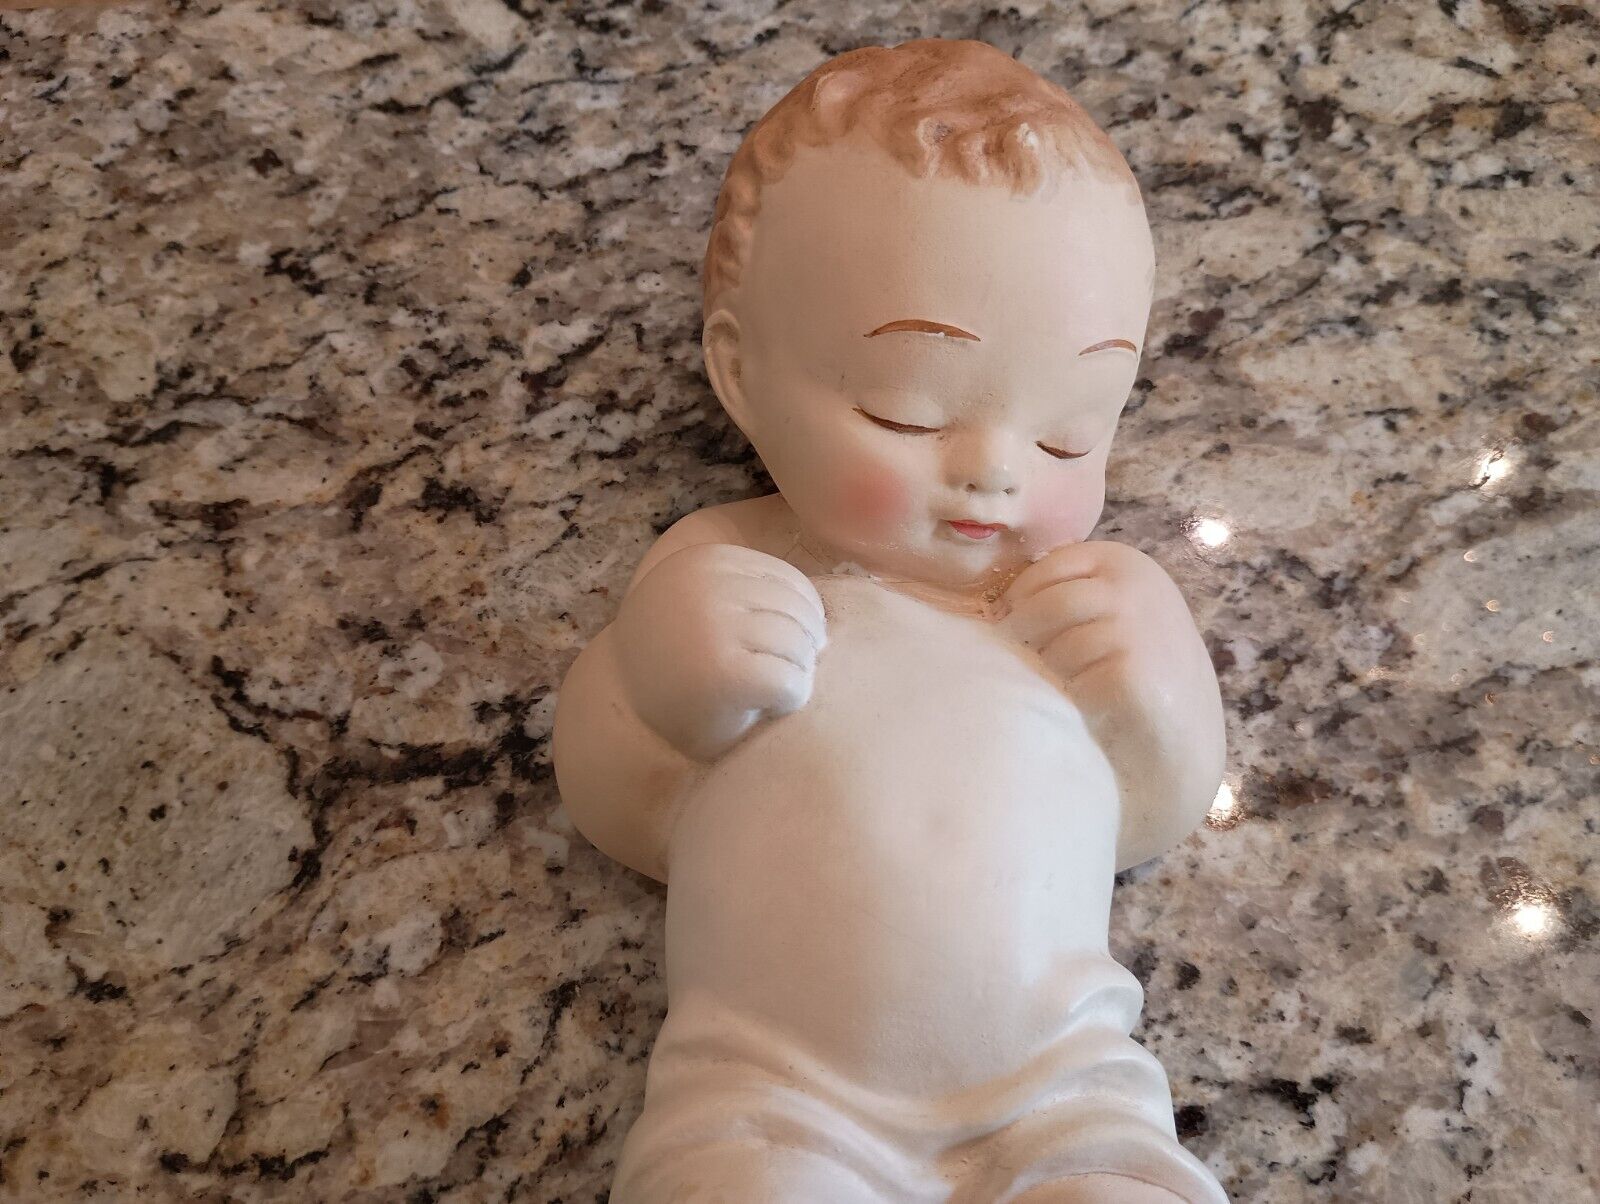  M J HUMMEL PORCELAIN NATIVITY BABY JESUS approx. 11 inches *RARE*